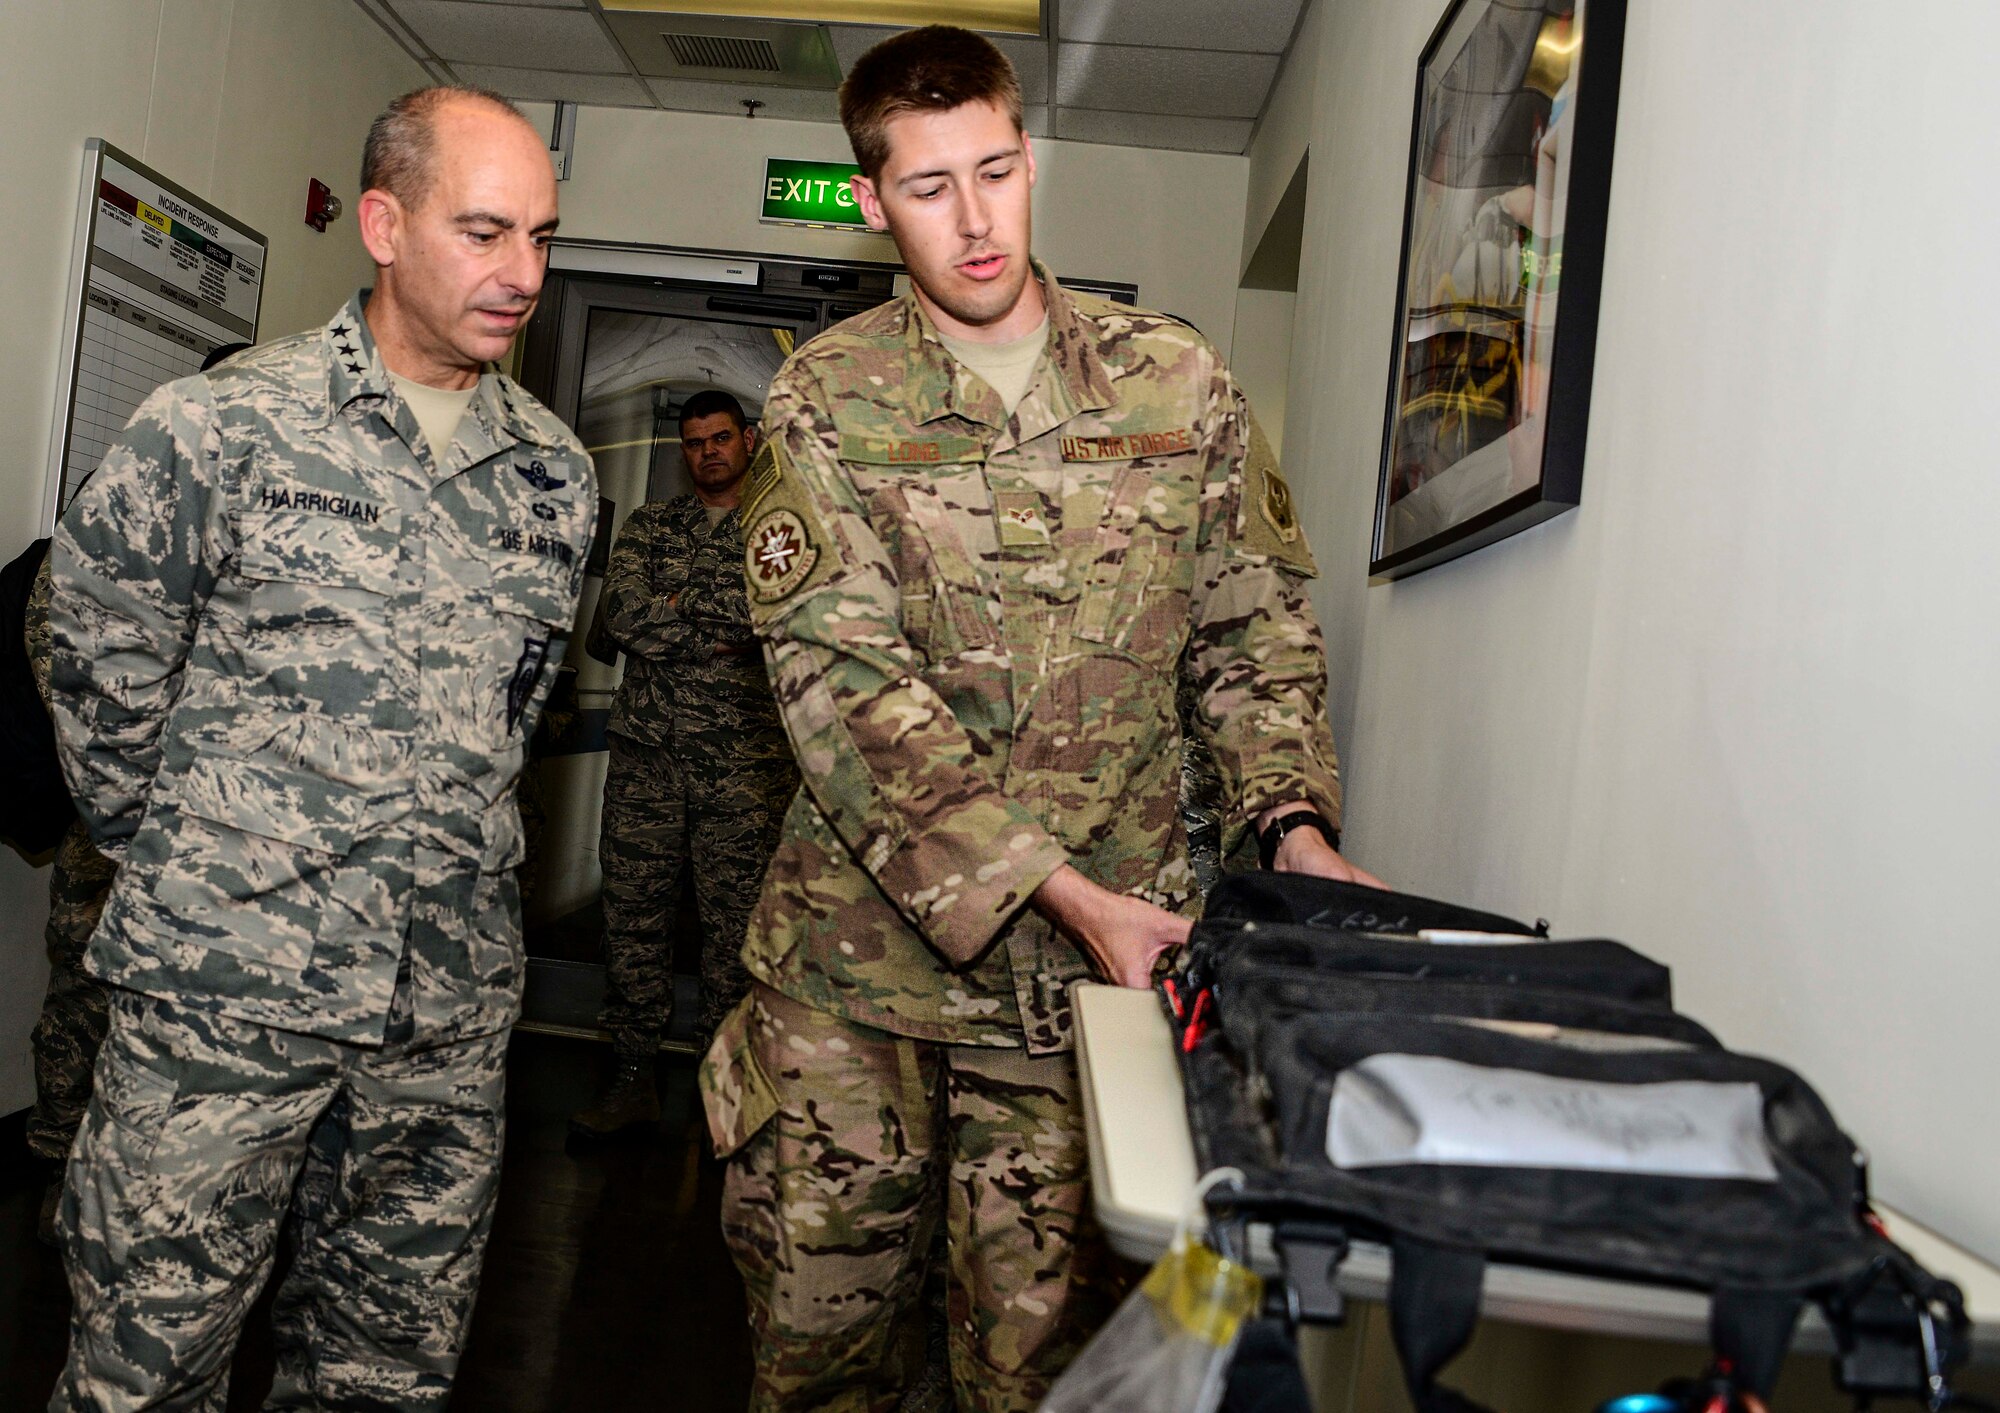 Senior Airman Aaron Long, 379th Expeditionary Medical Group surgical technician, shows Lt. Gen. Jeffrey L. Harrigian, U.S. Air Forces Central Command commander, surgical mobility bags to be palletized and placed on aircraft for delivery within the U.S. Air Forces Central Command area of responsibility during Harrigian’s visit with the 379th Air Expeditionary Wing Aug. 11, 2016, at Al Udeid Air Base, Qatar. Harrigian and Chief Master Sgt. Joseph Montgomery, USAFCENT command chief, toured various facilities and met 379th AEW Airmen to get an inside look at what they do on a daily basis. (U.S. Air Force photo/Senior Airman Janelle Patiño/Released)